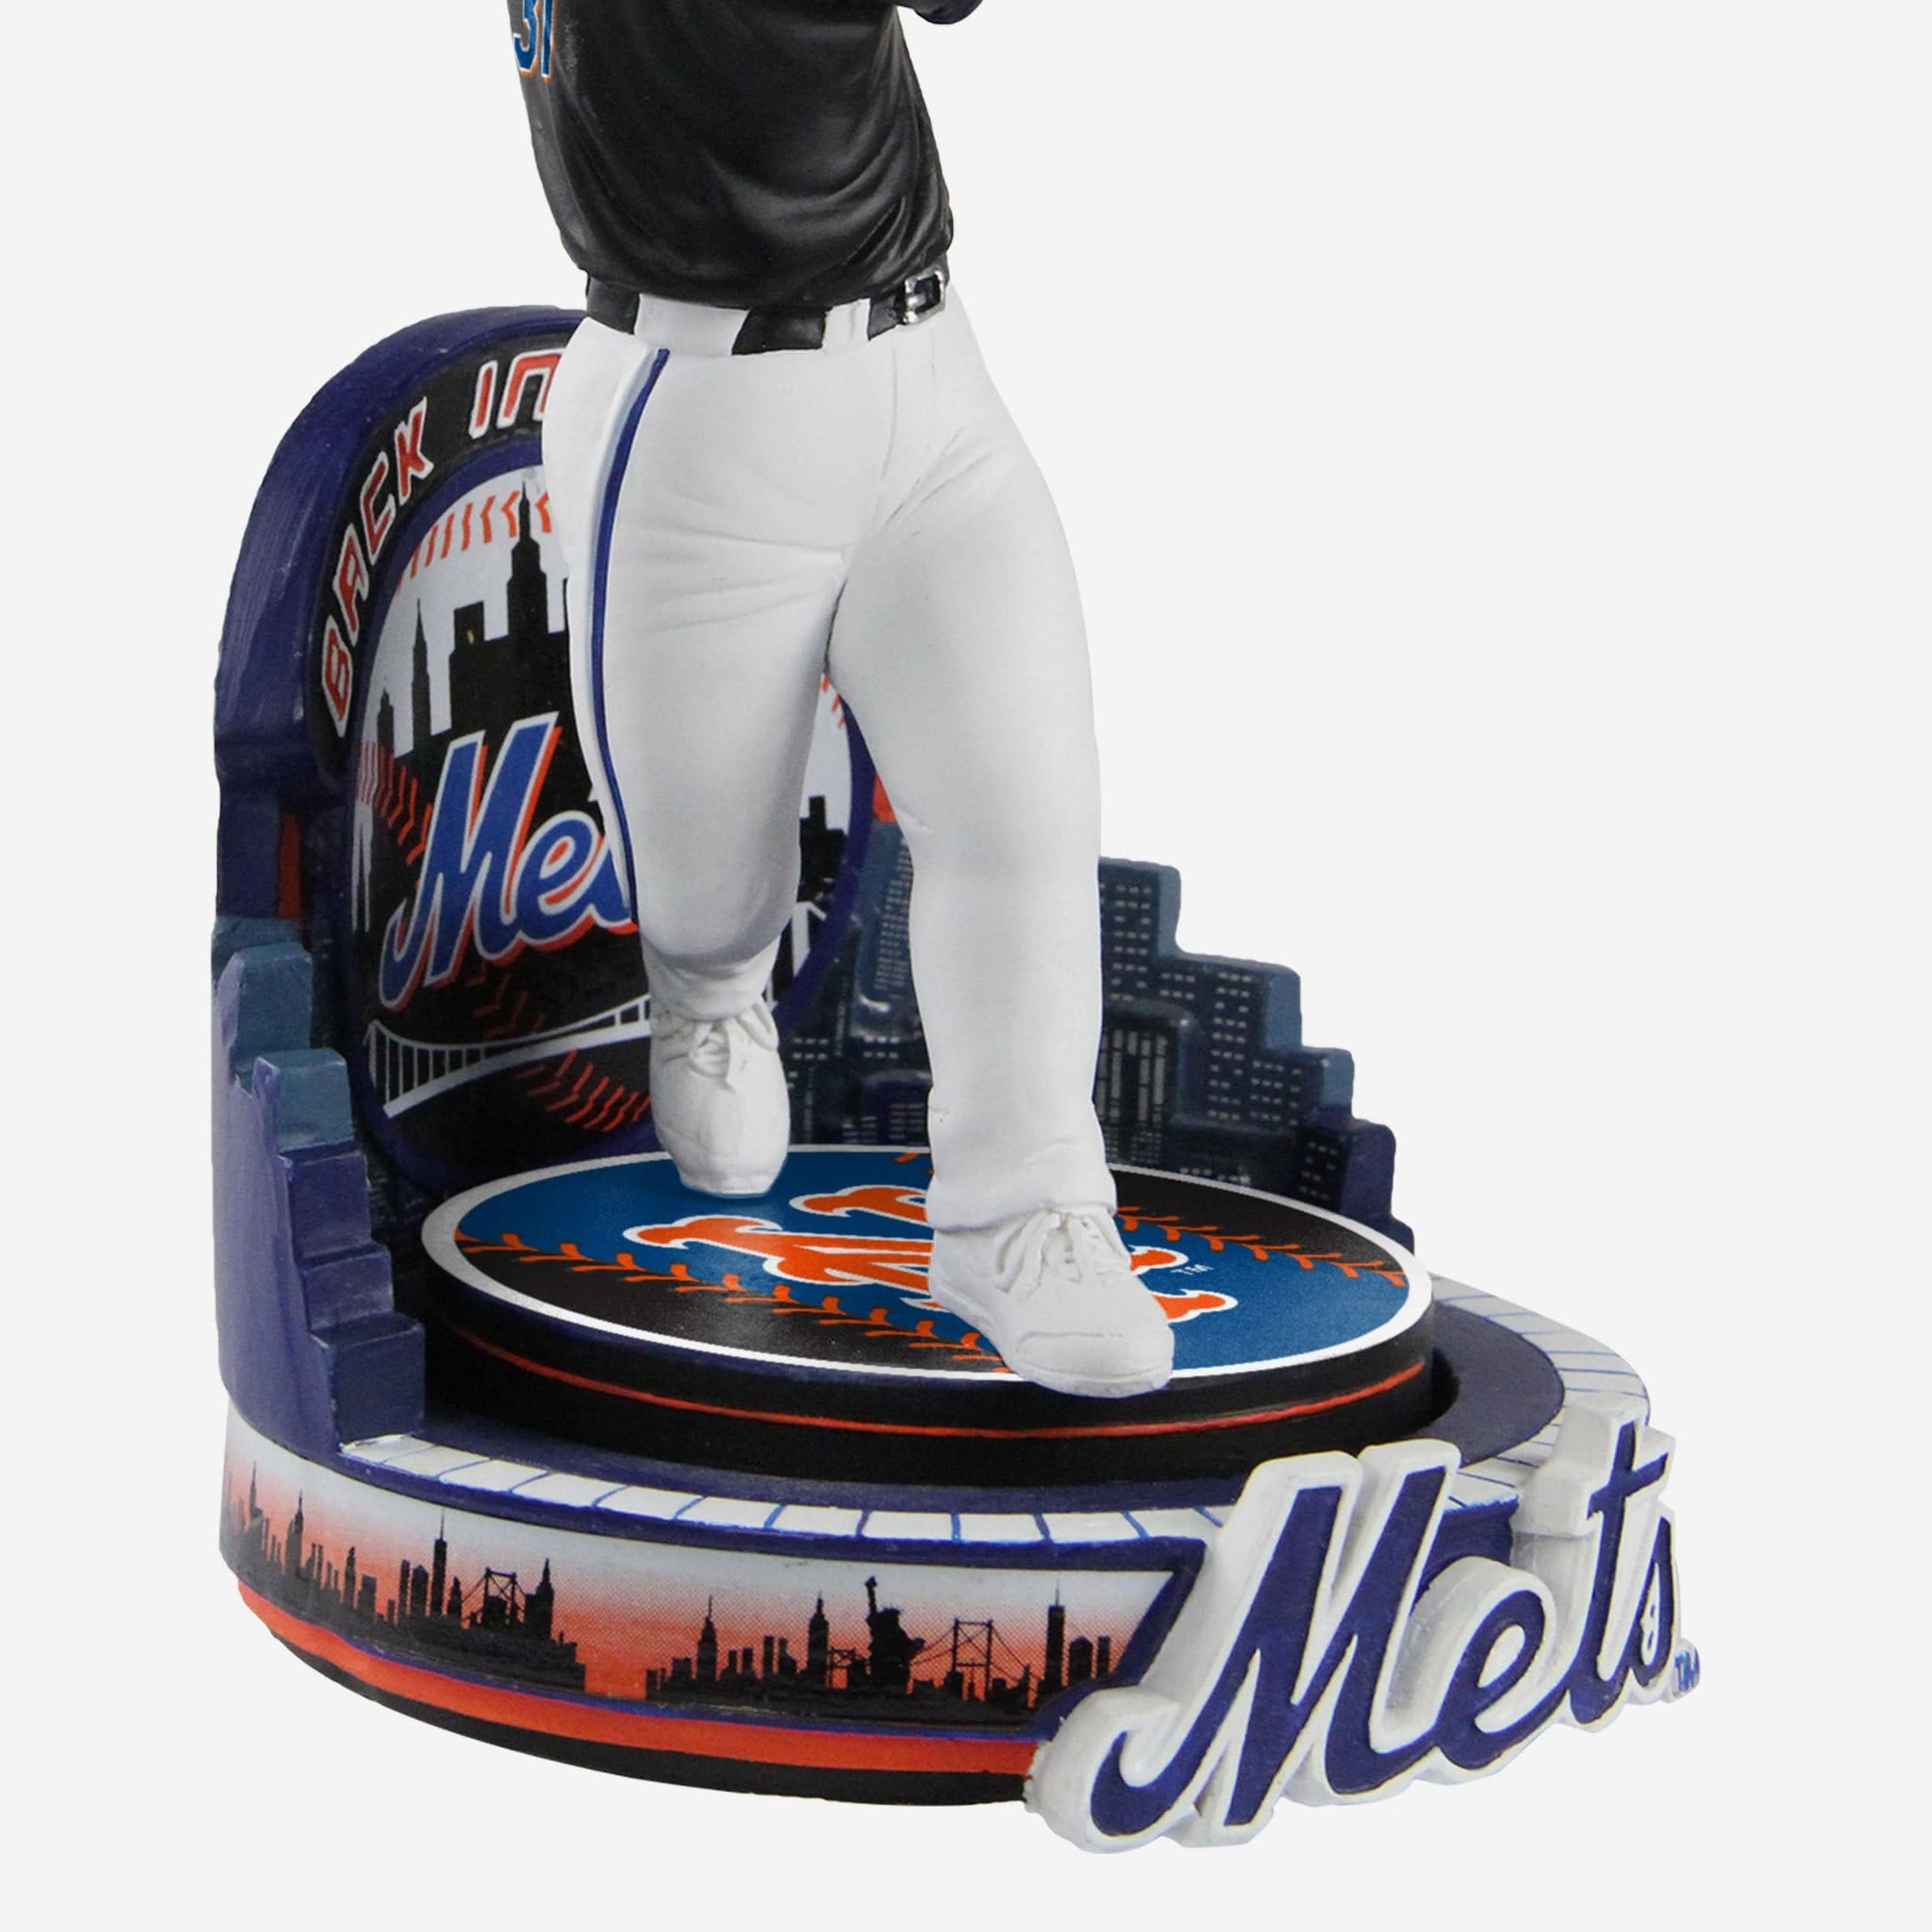 Mike Piazza New York Mets 2001 MLB All-Star Game Commemorative Bobblehead Officially Licensed by MLB